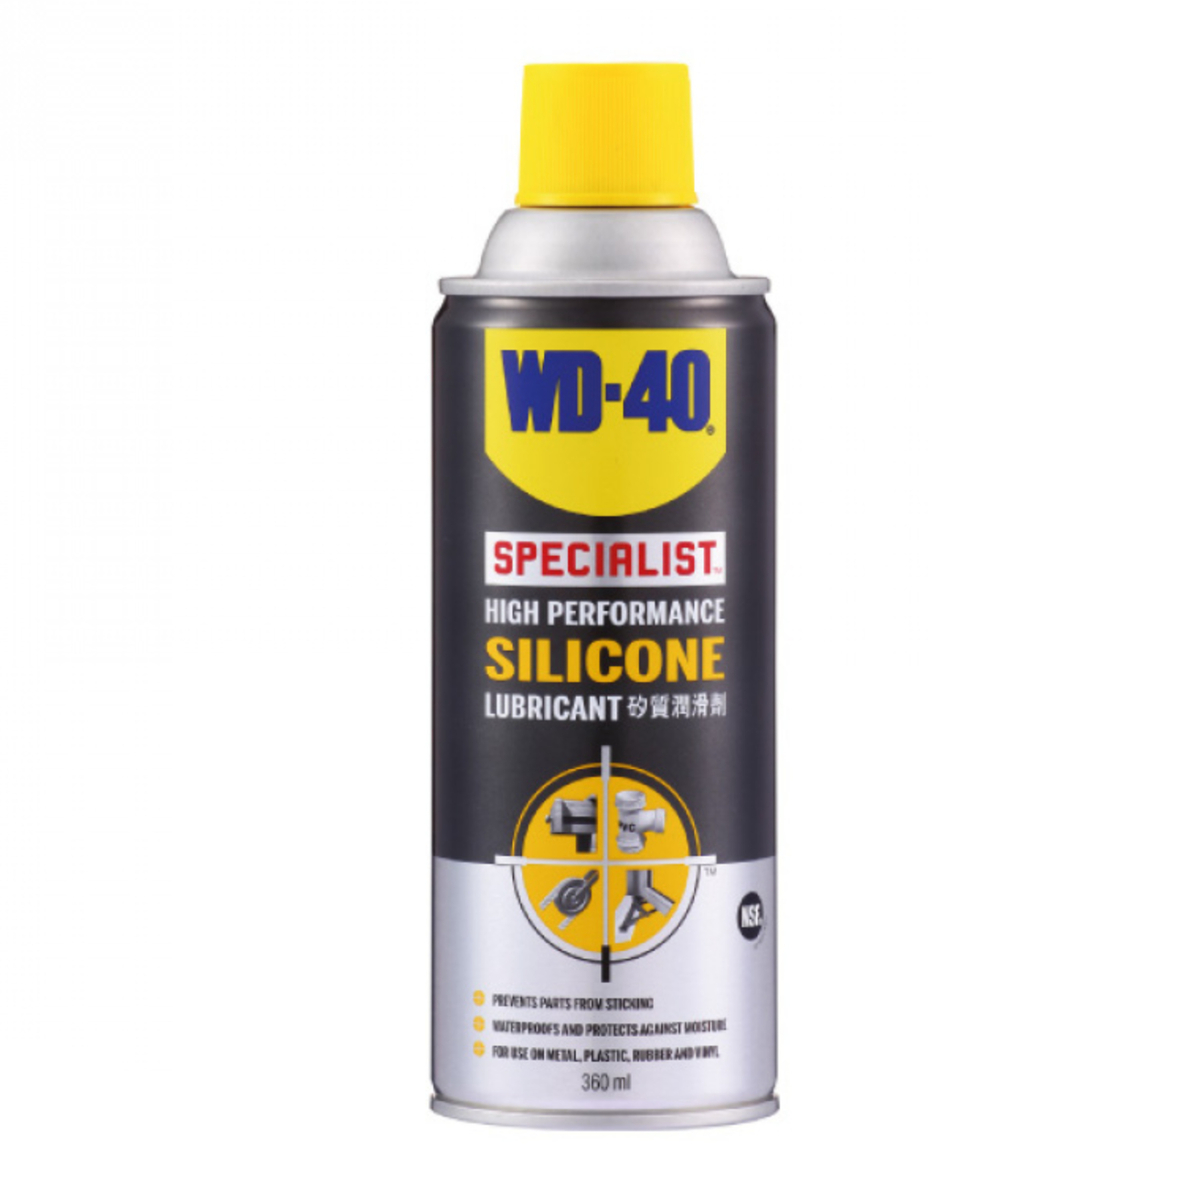 WD-40 Specialist Silicone Lubricant 360ml